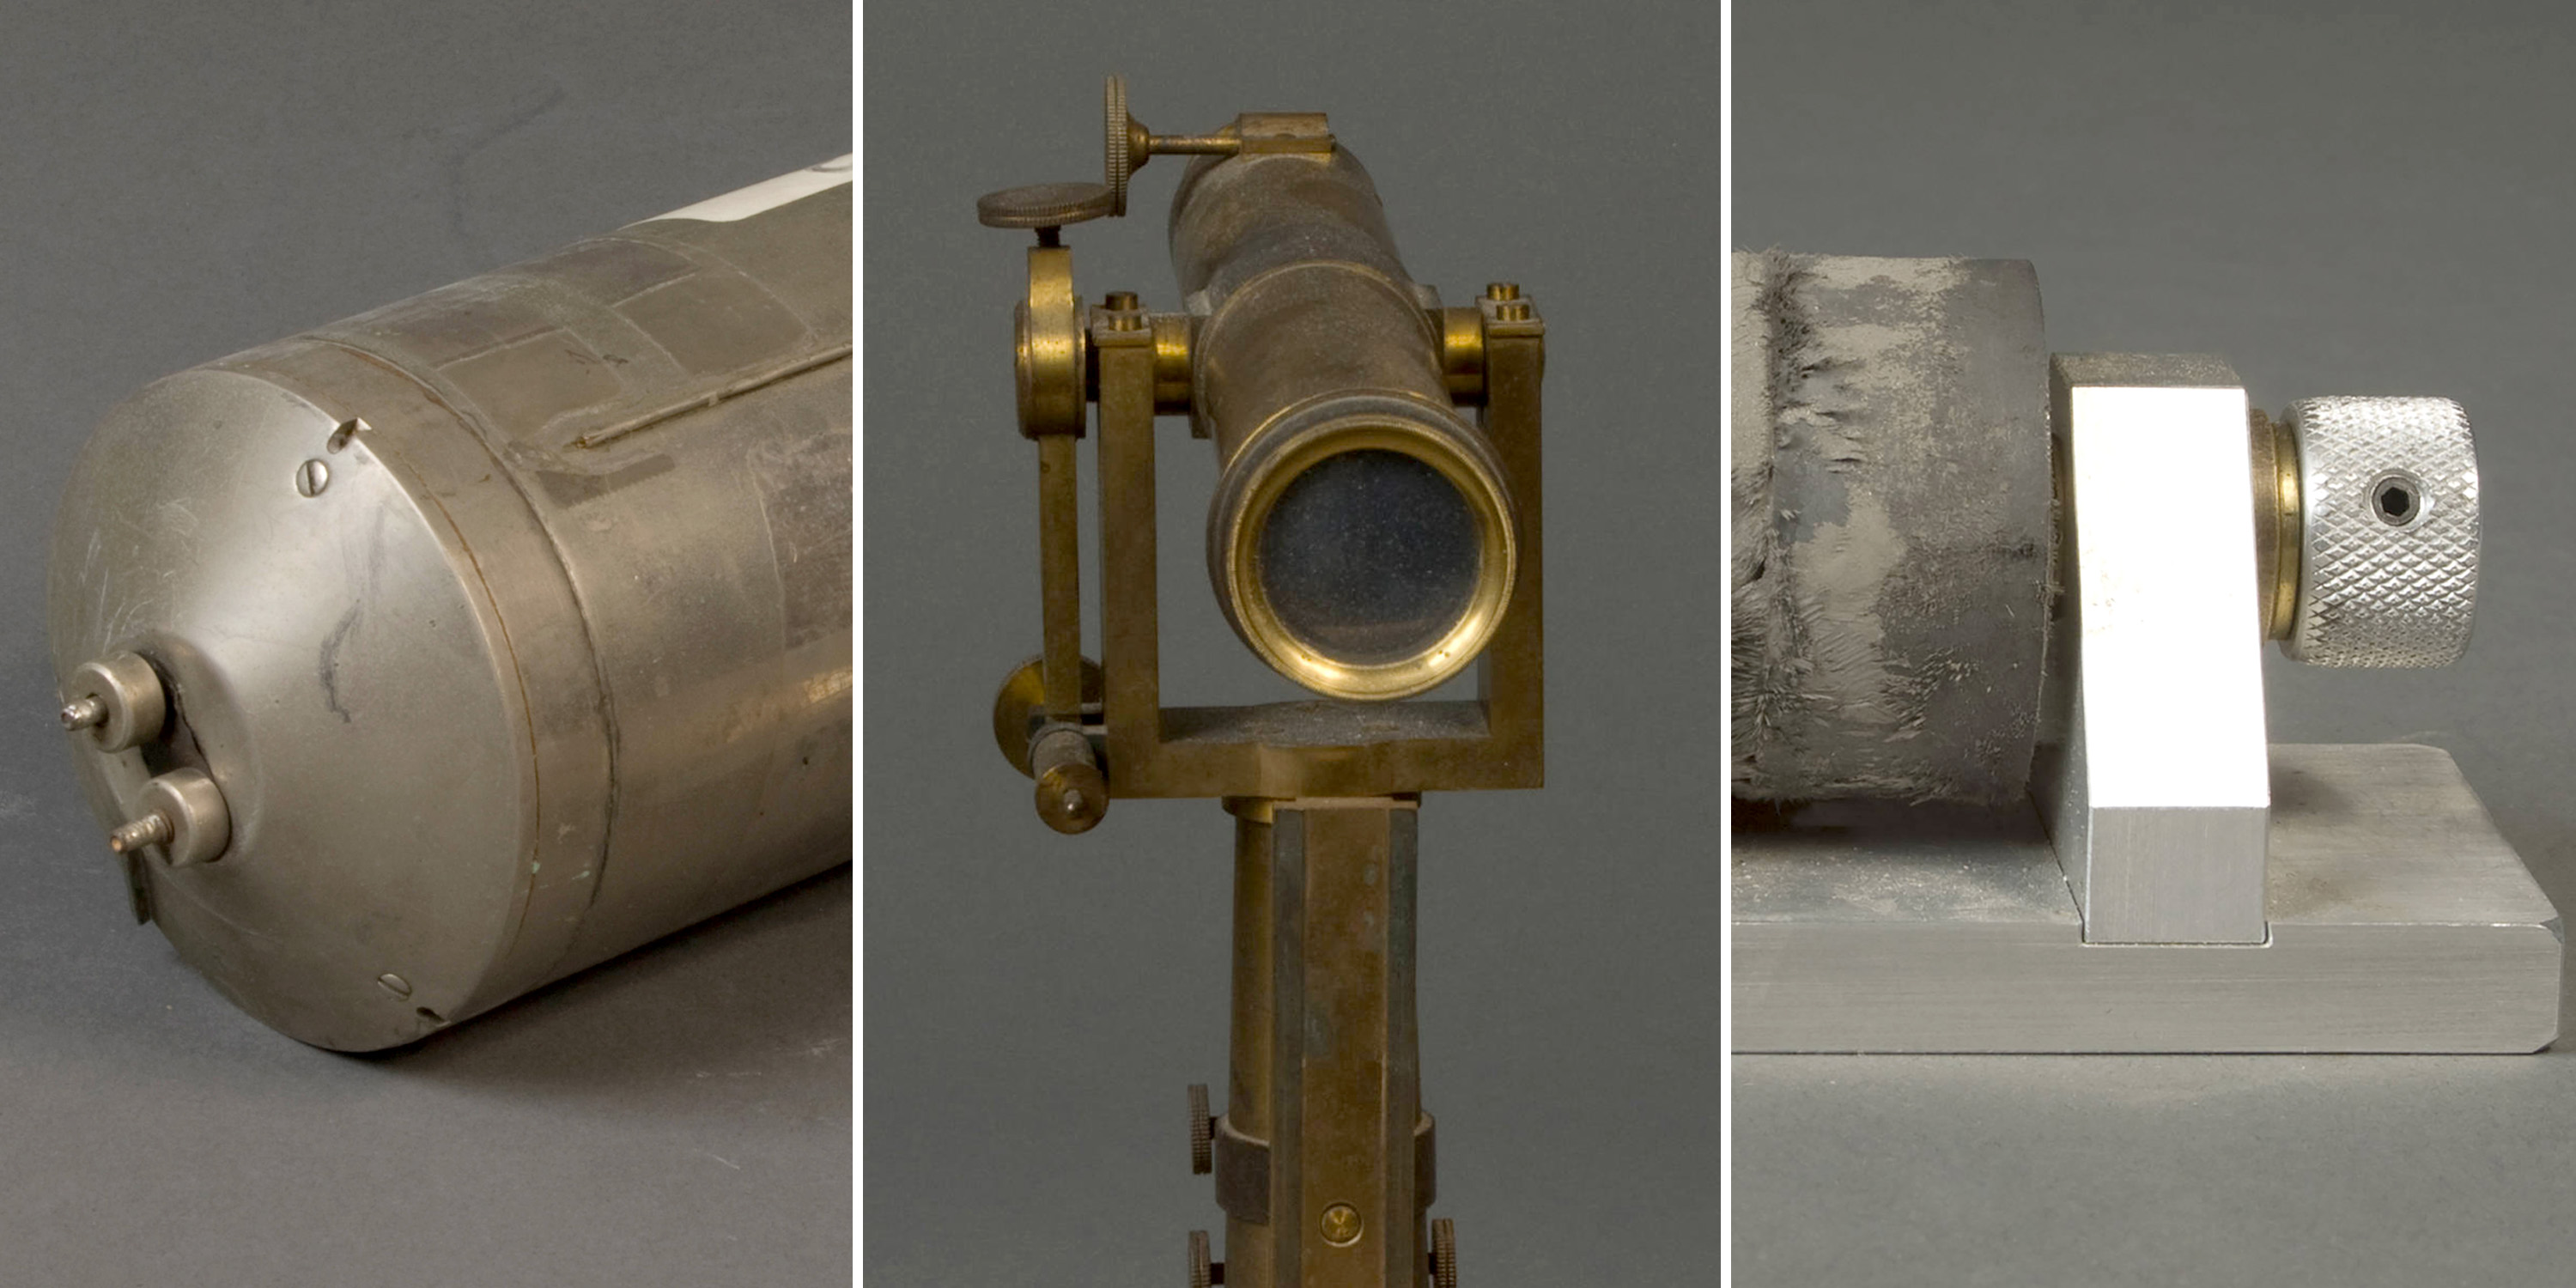 from left to right, a a metal cylinder, a telescope, and a device with rubber bushings on a spindle